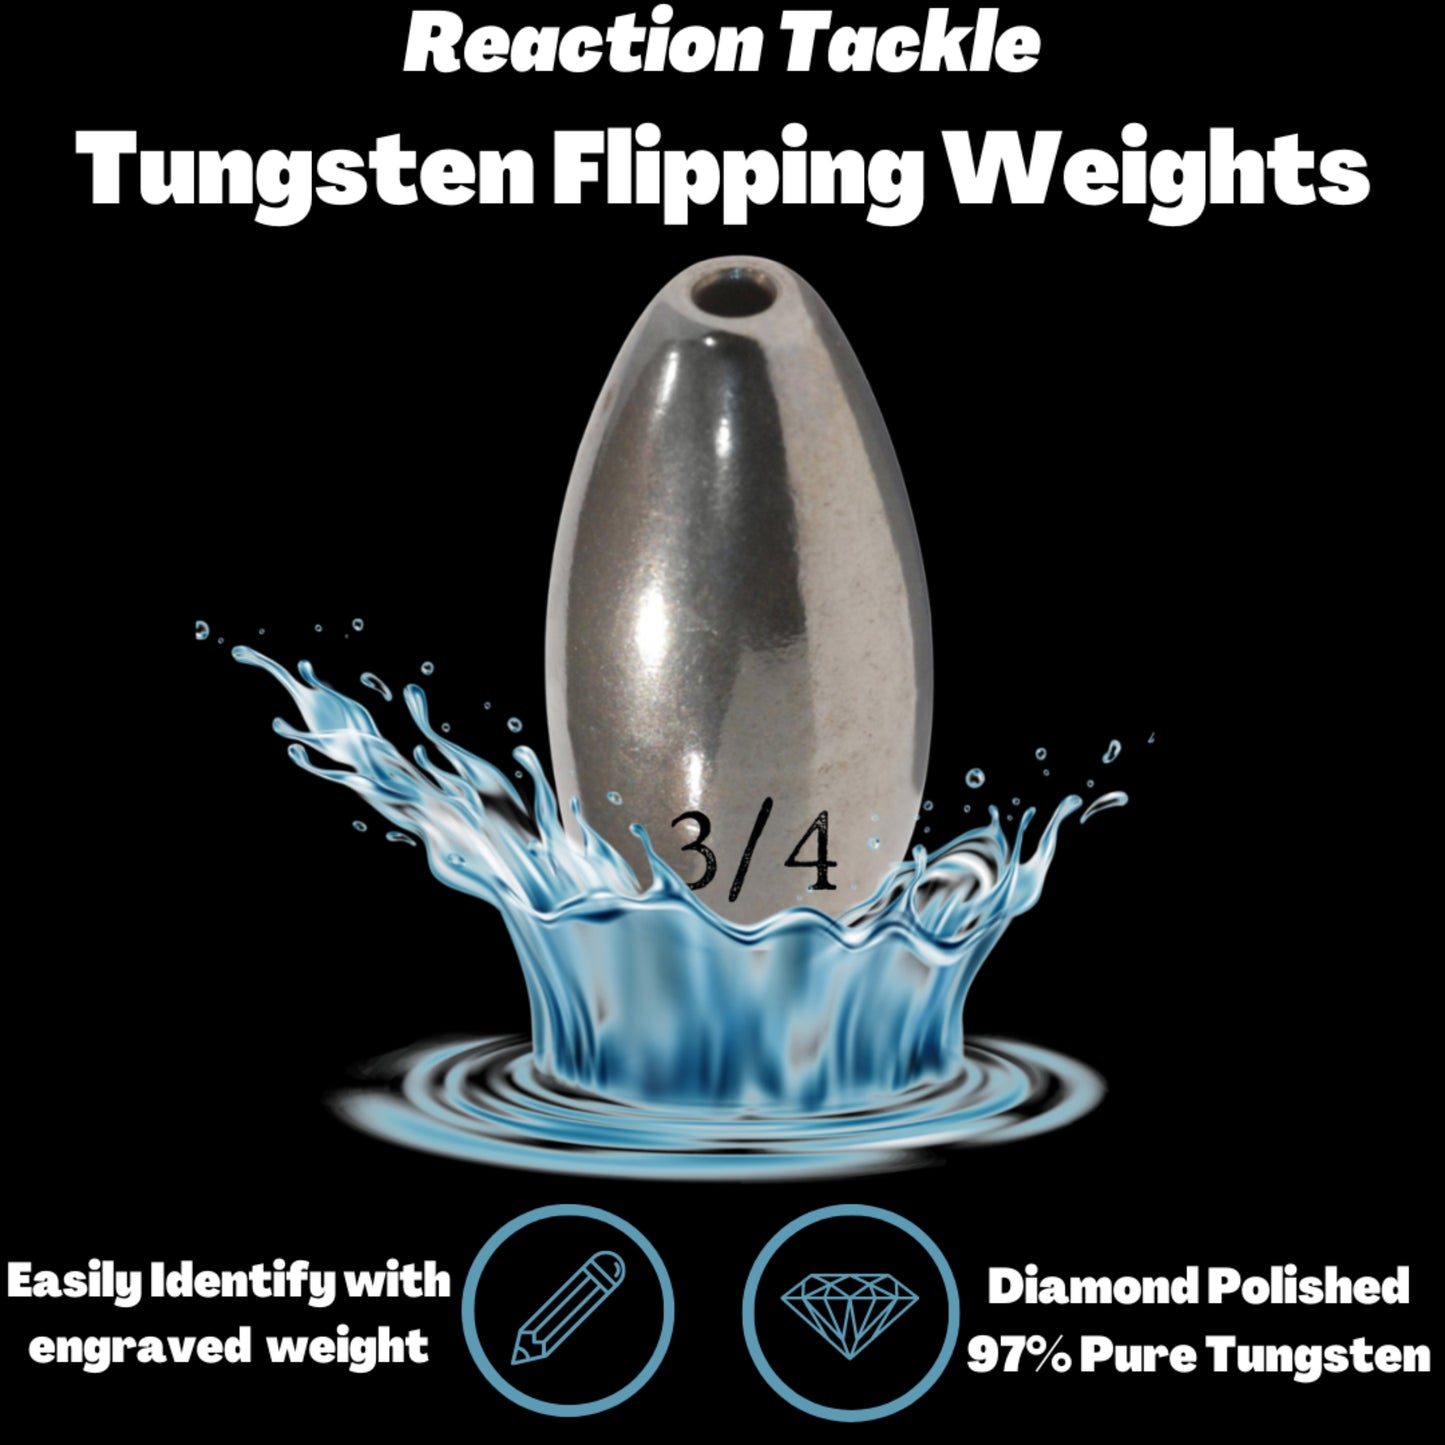 Reaction Tackle Tungsten Flipping Weights